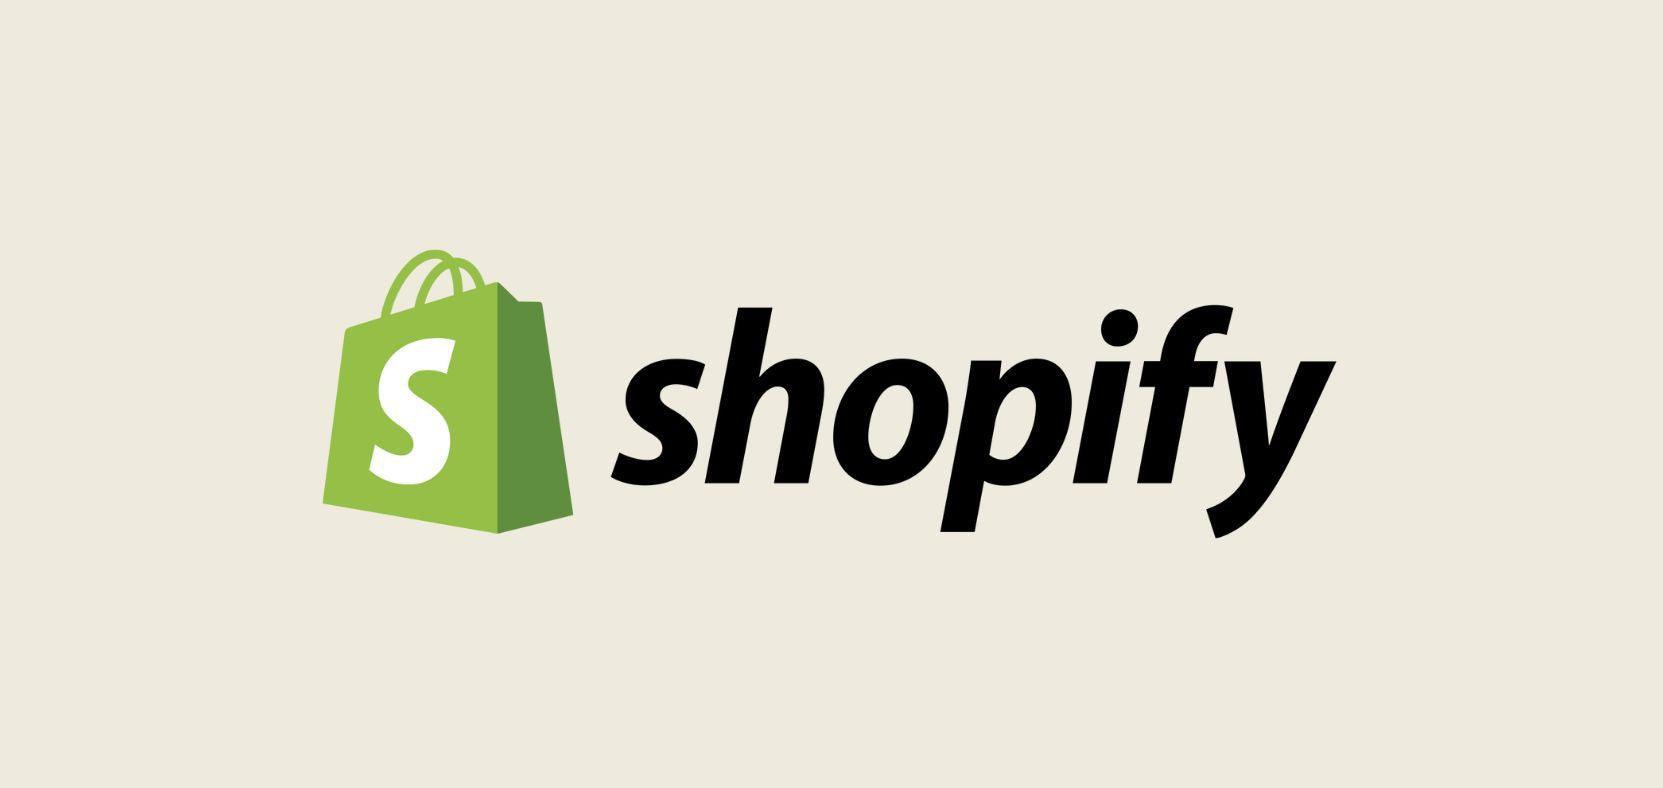 Shopify drops its App Store commissions to 0% on developers' first million  in revenue